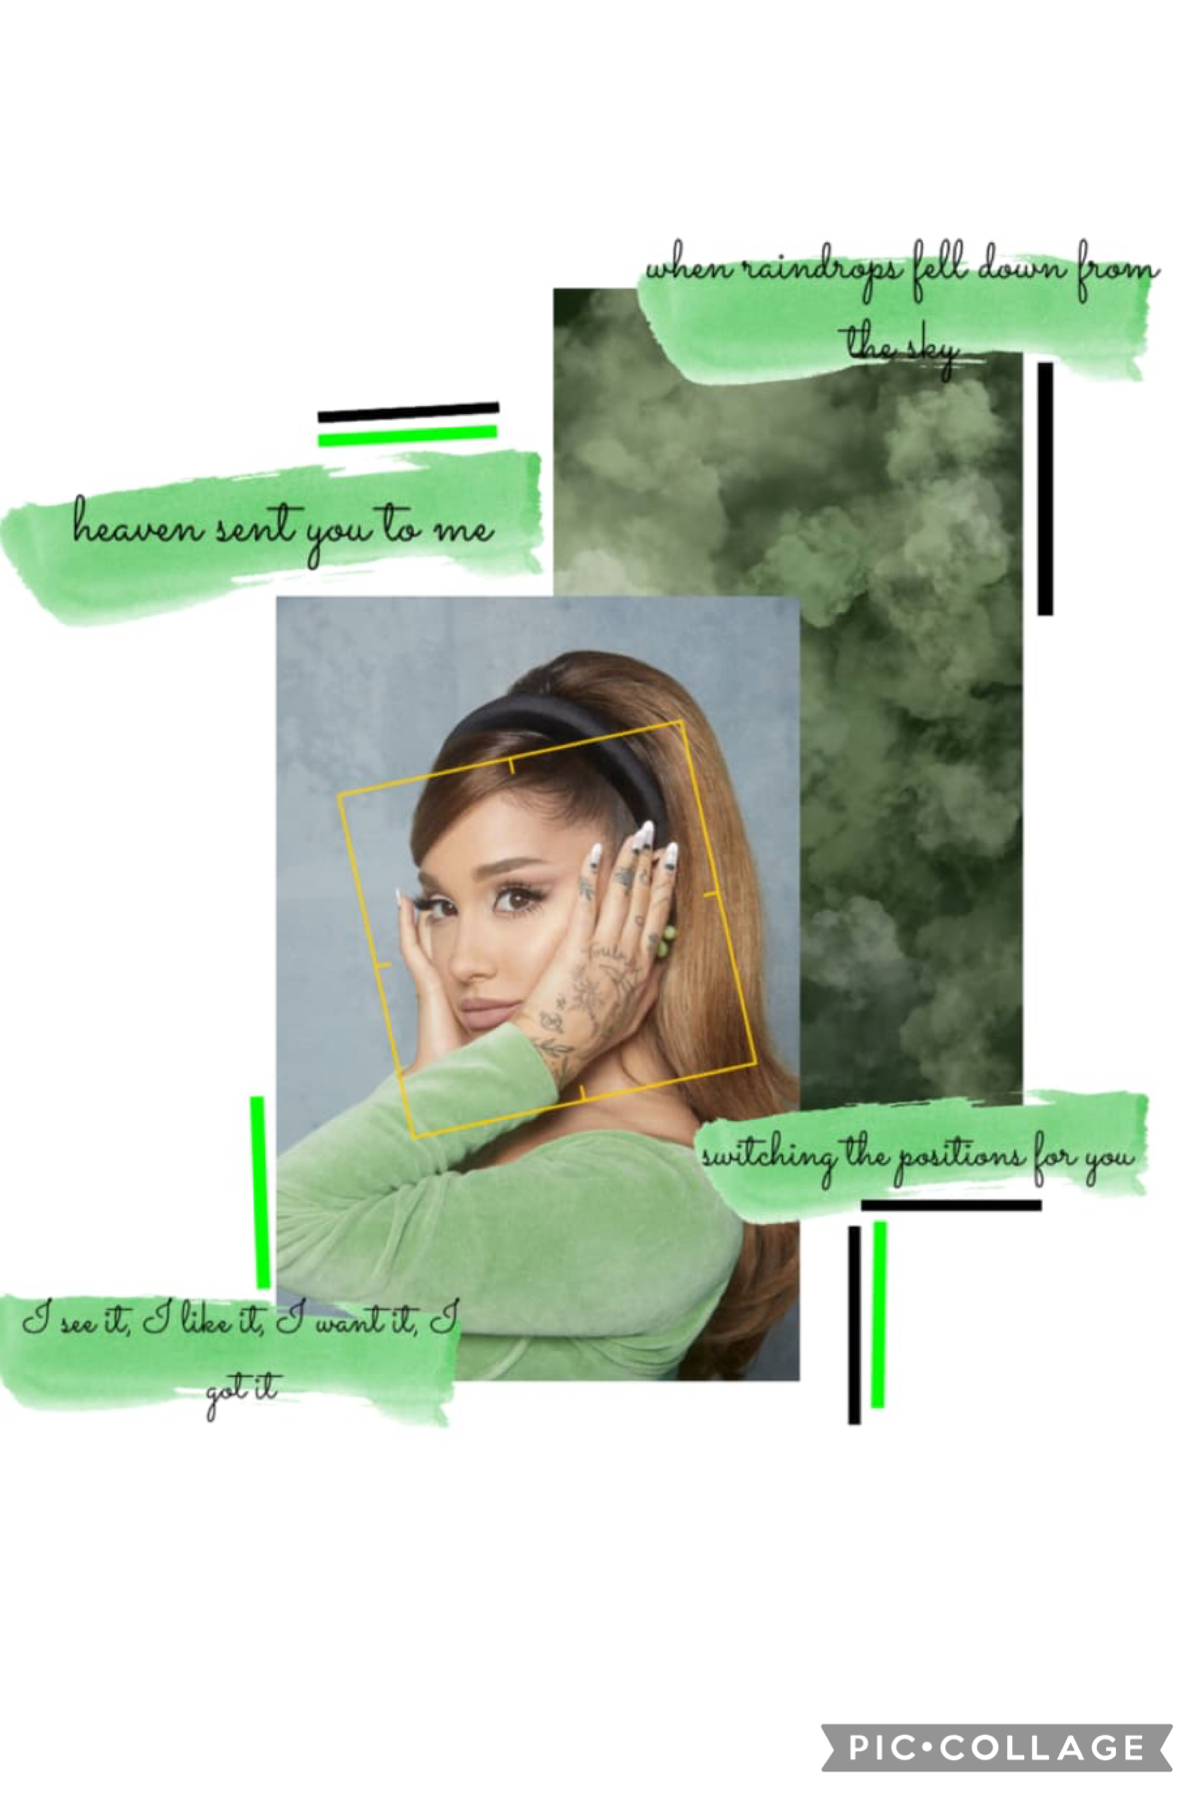 🌿Ariana Grande🌿
What’s your fave Ariana song?